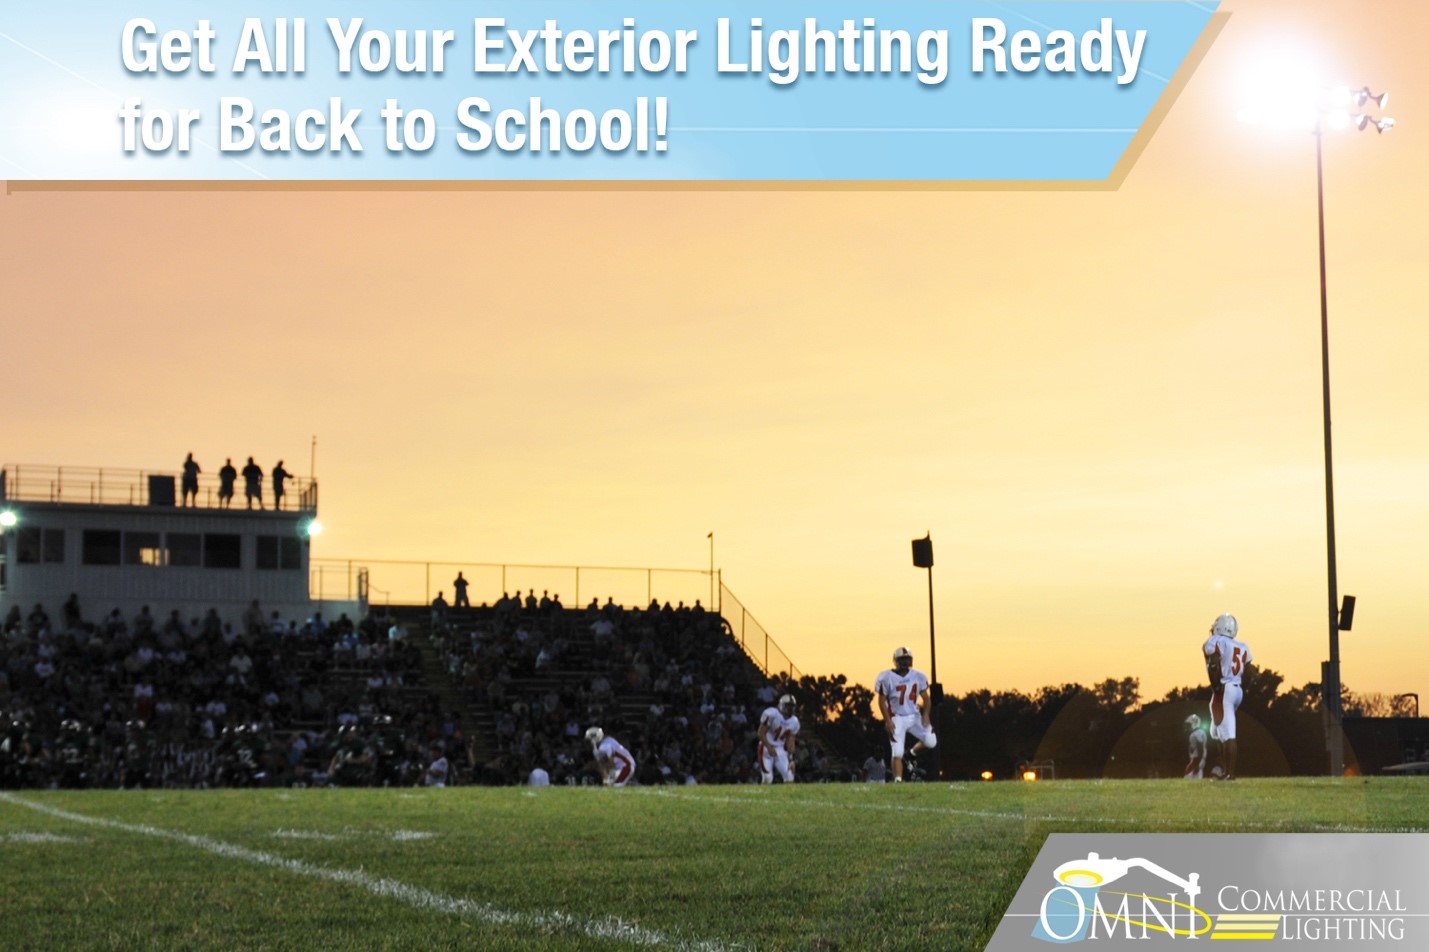 Get All Your Exterior Lighting Ready for Back to School